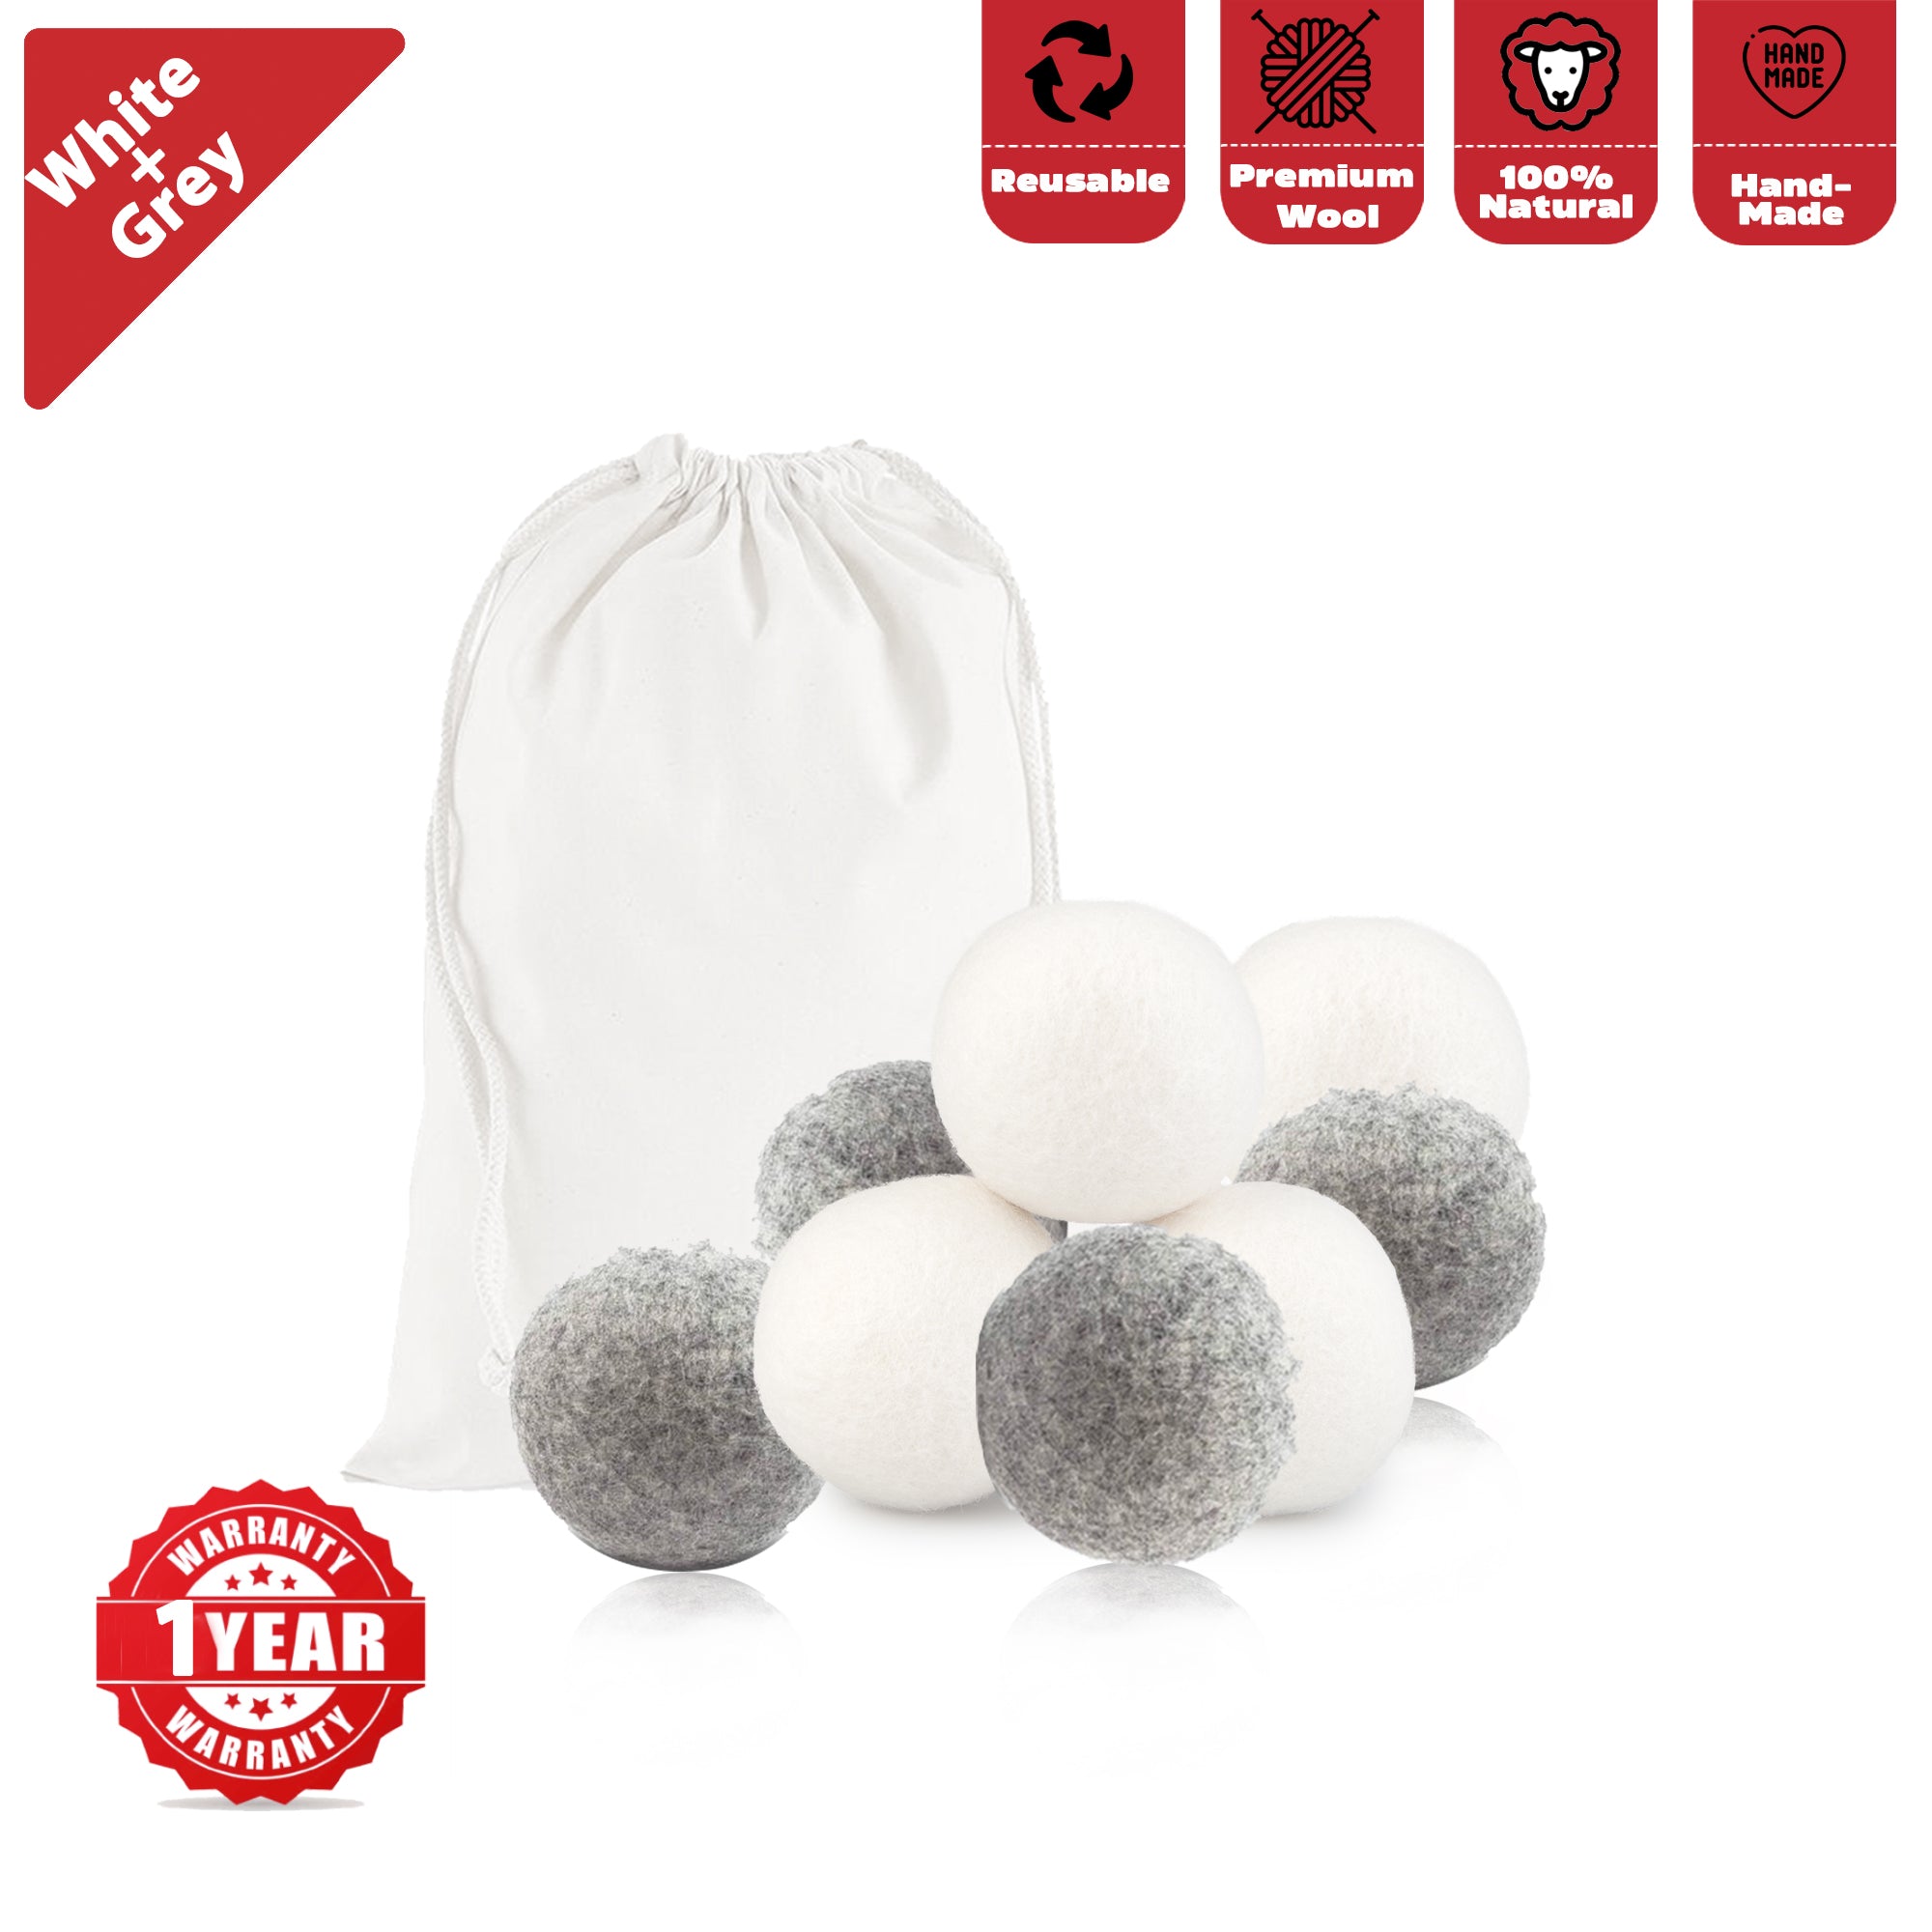 Wool Dryer Balls, Natural Fabric Softener, Reusable, Reduces Clothing Wrinkles and Saves Drying Time